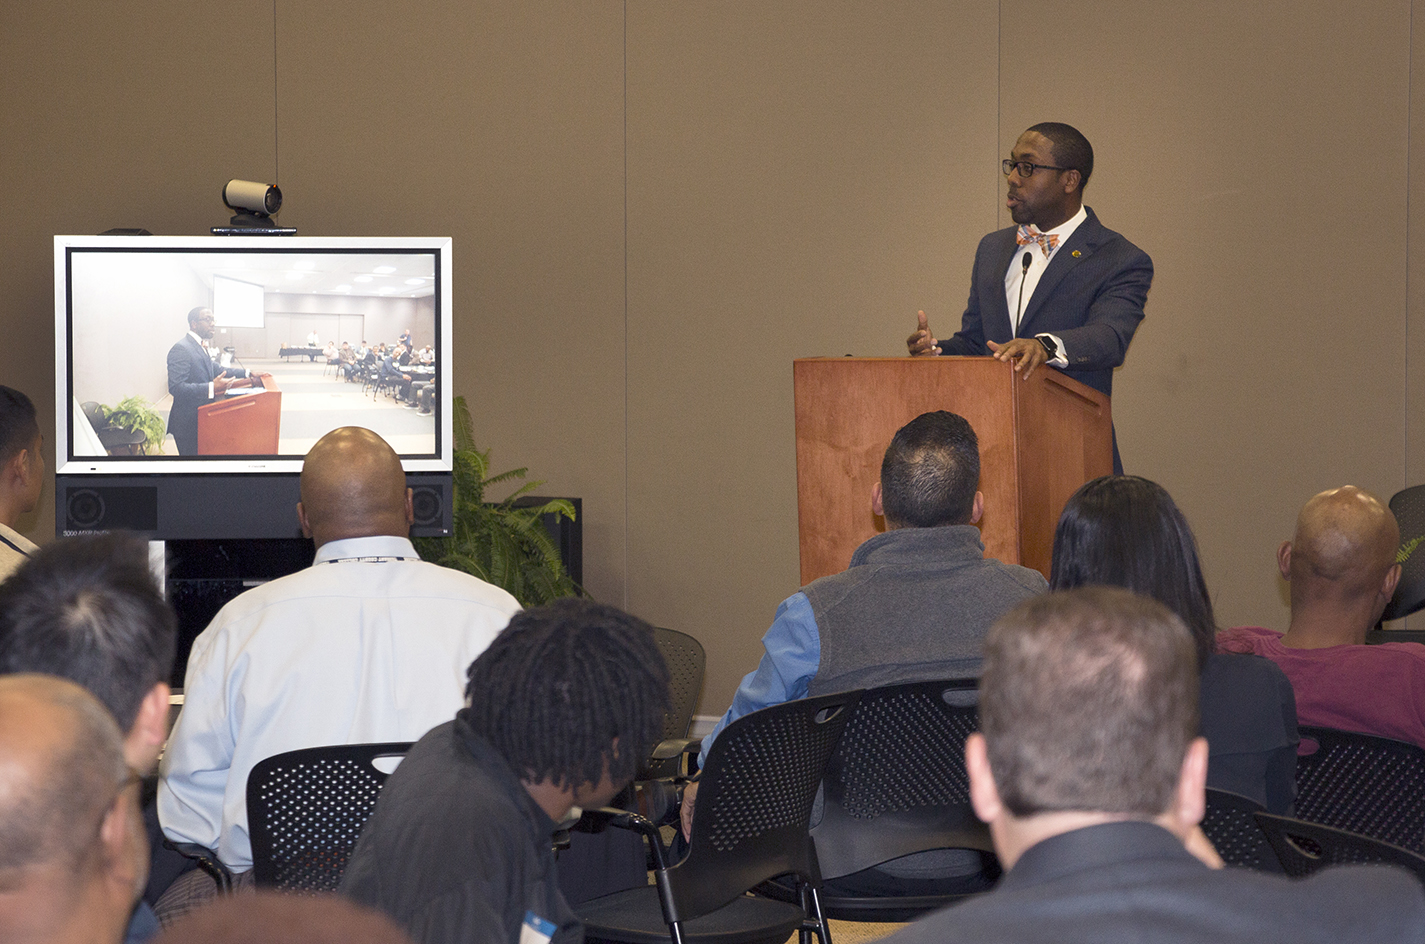 Quentin Hart, the first black mayor of Waterloo, Iowa, addressed Men of Color Mentoring members at the Spring 2017 kickoff event.